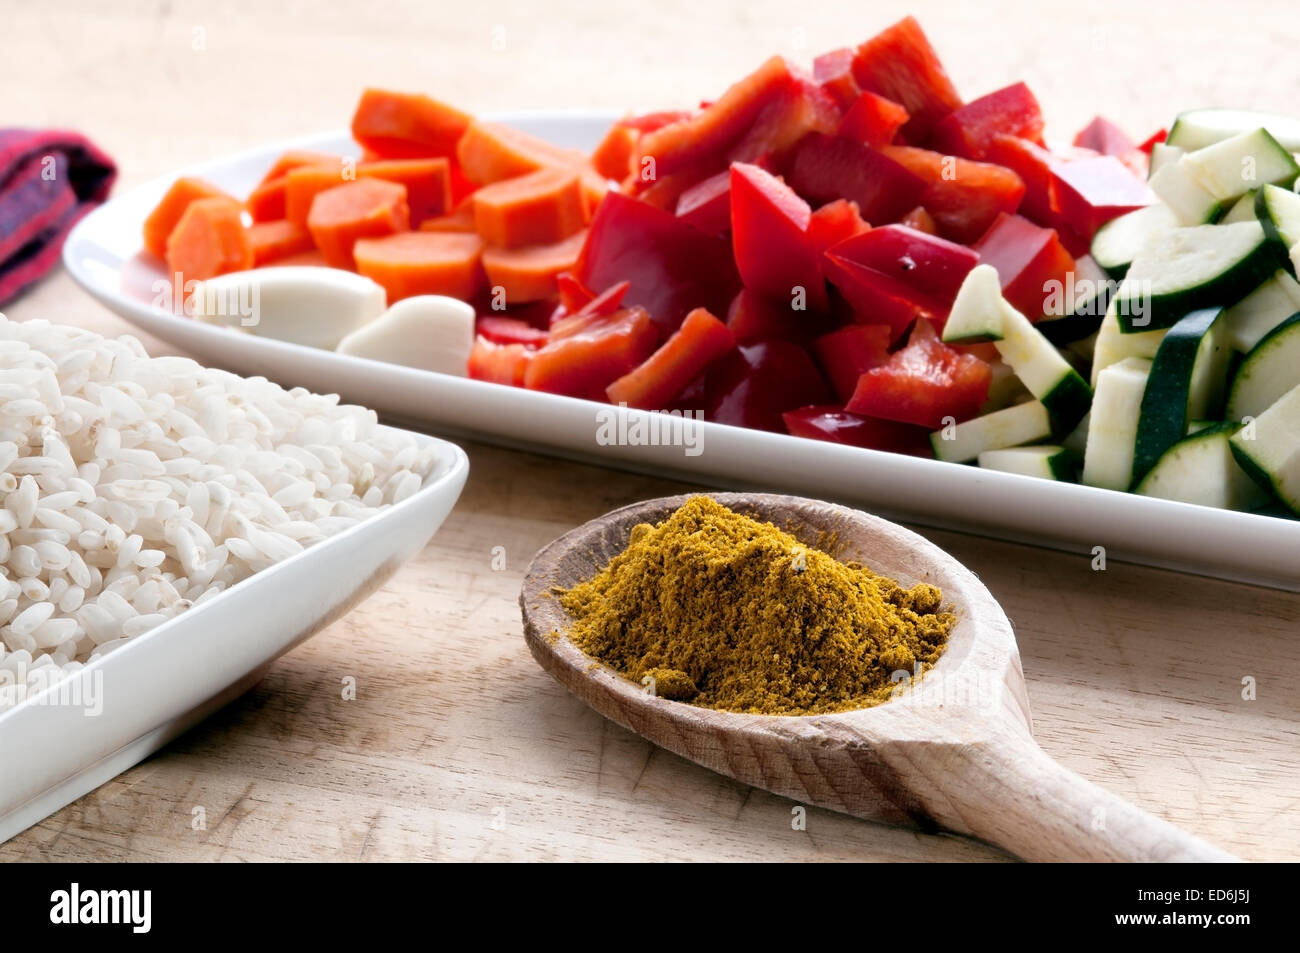 raw ingredients ready to prepare chicken curry with vegetables Stock Photo